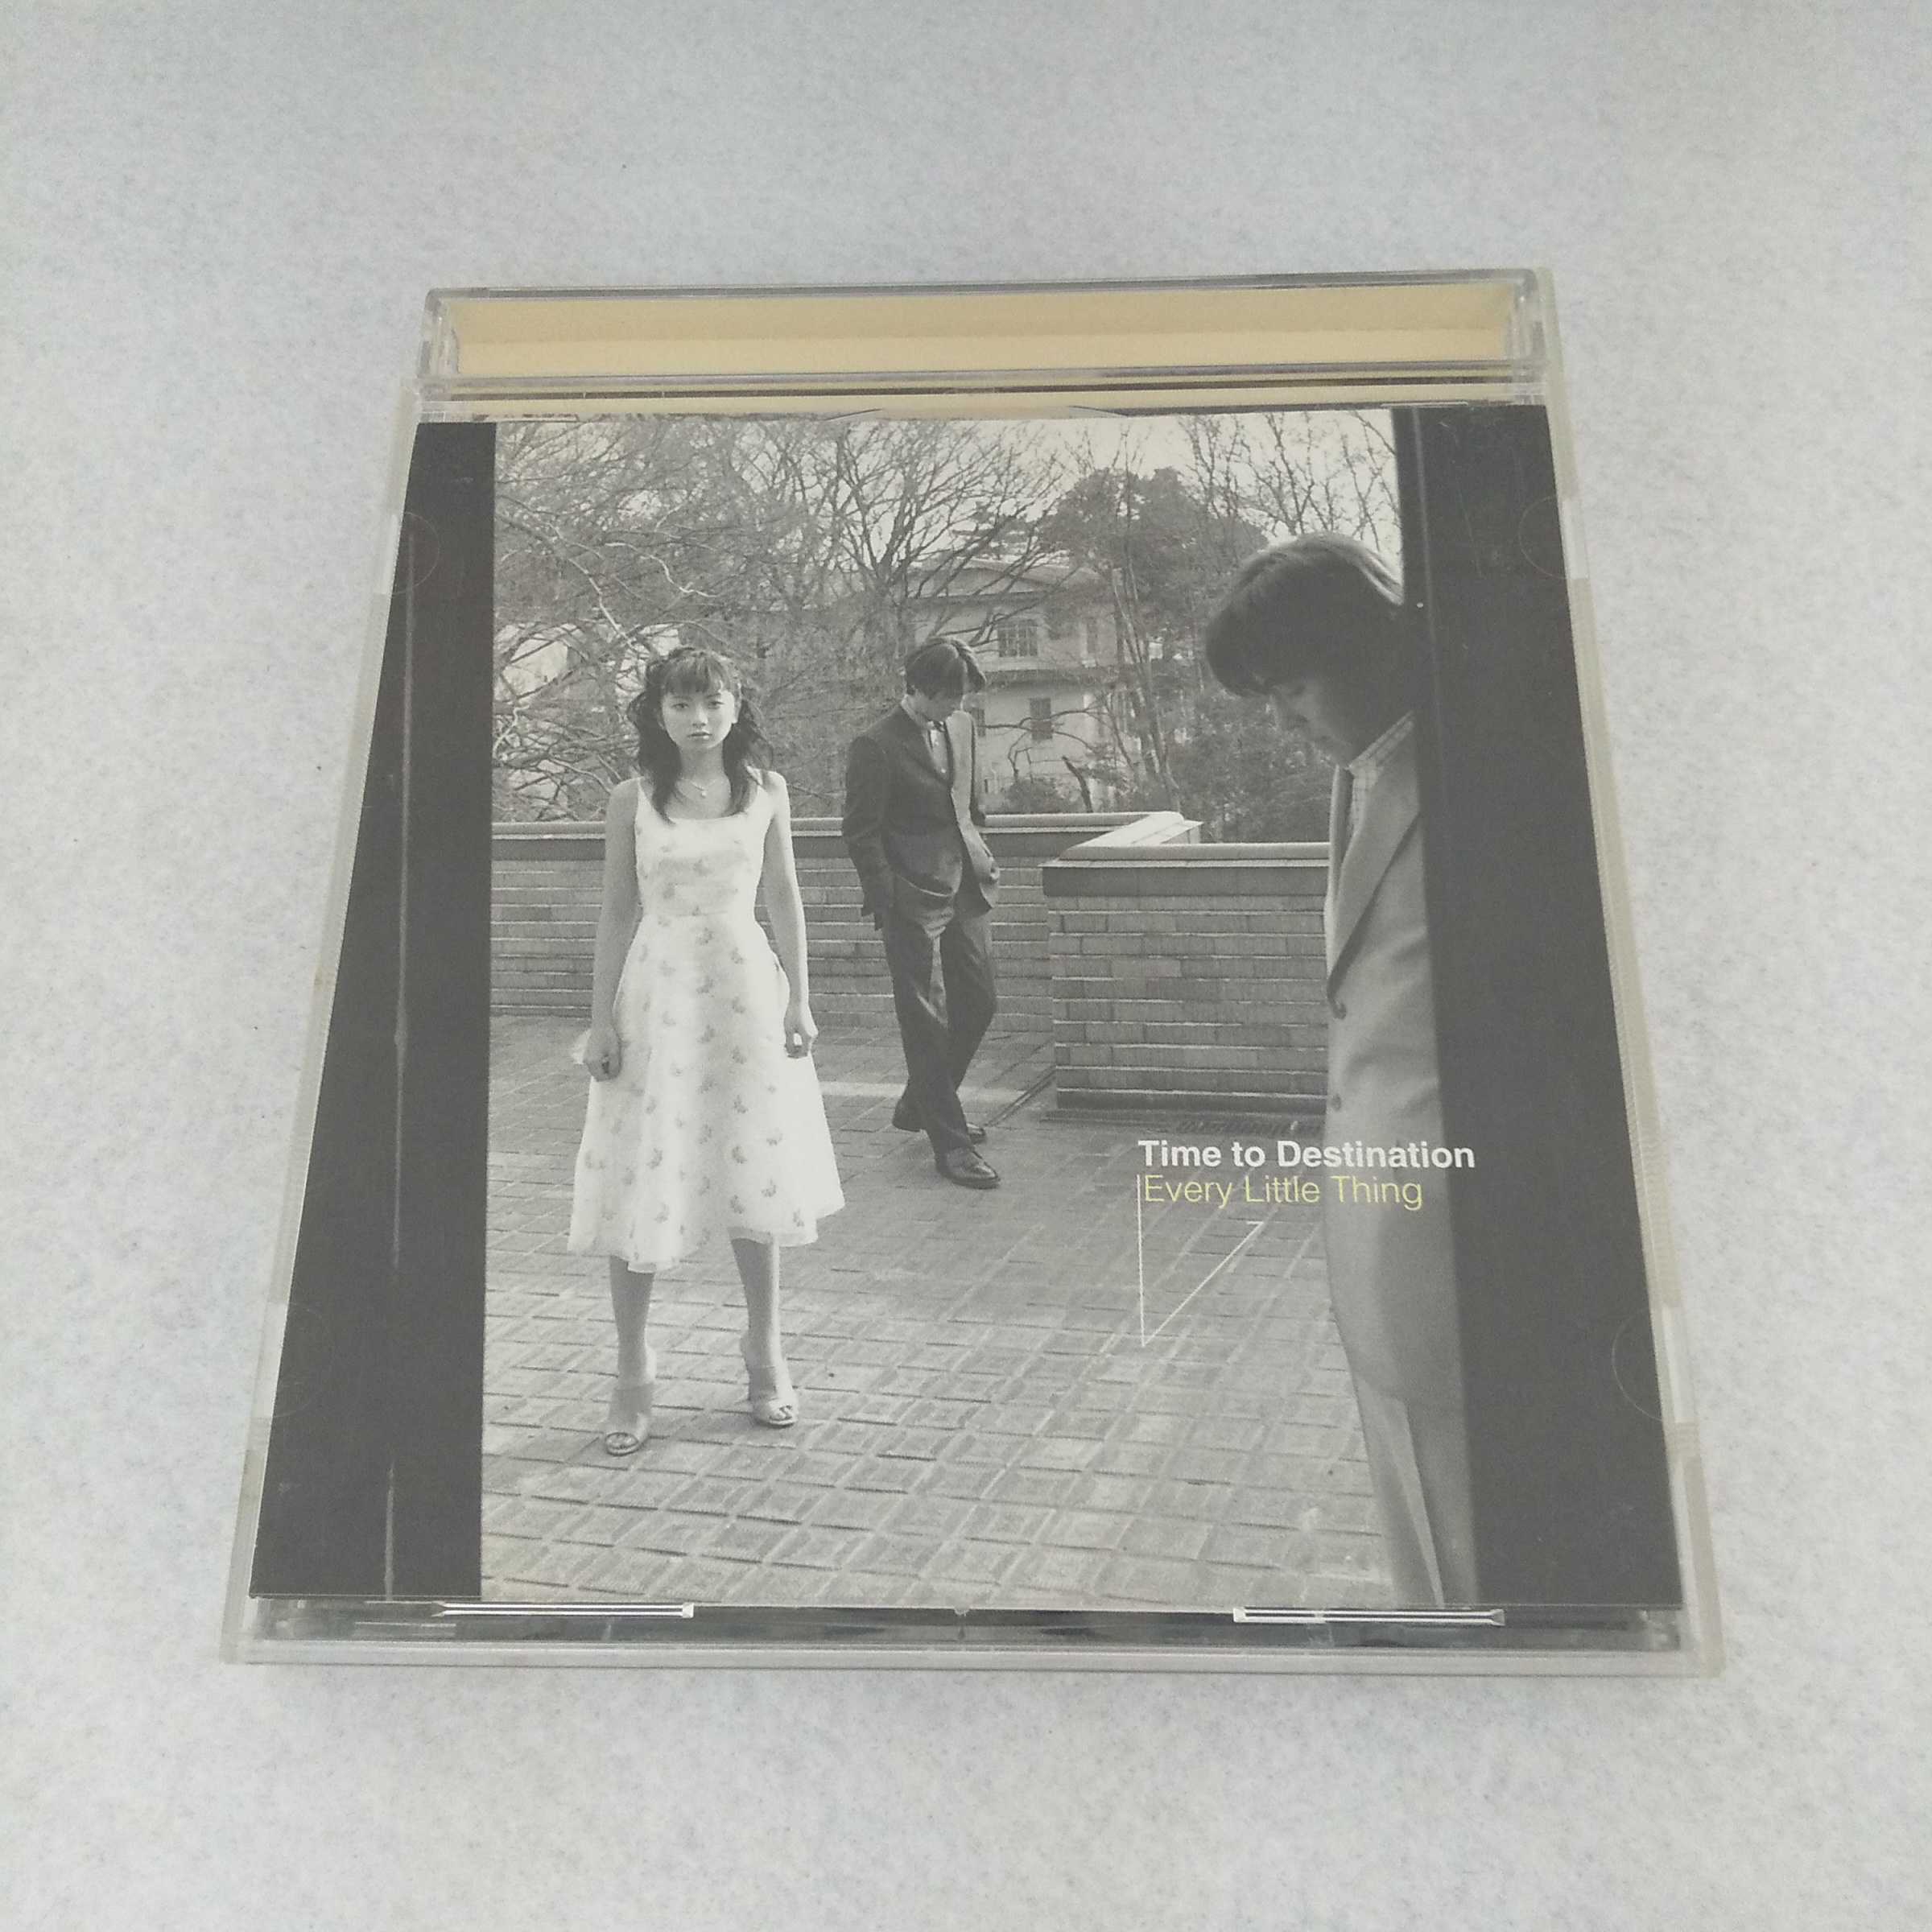 AC10463 【中古】 【CD】 Time to Destination/Every Little Thing